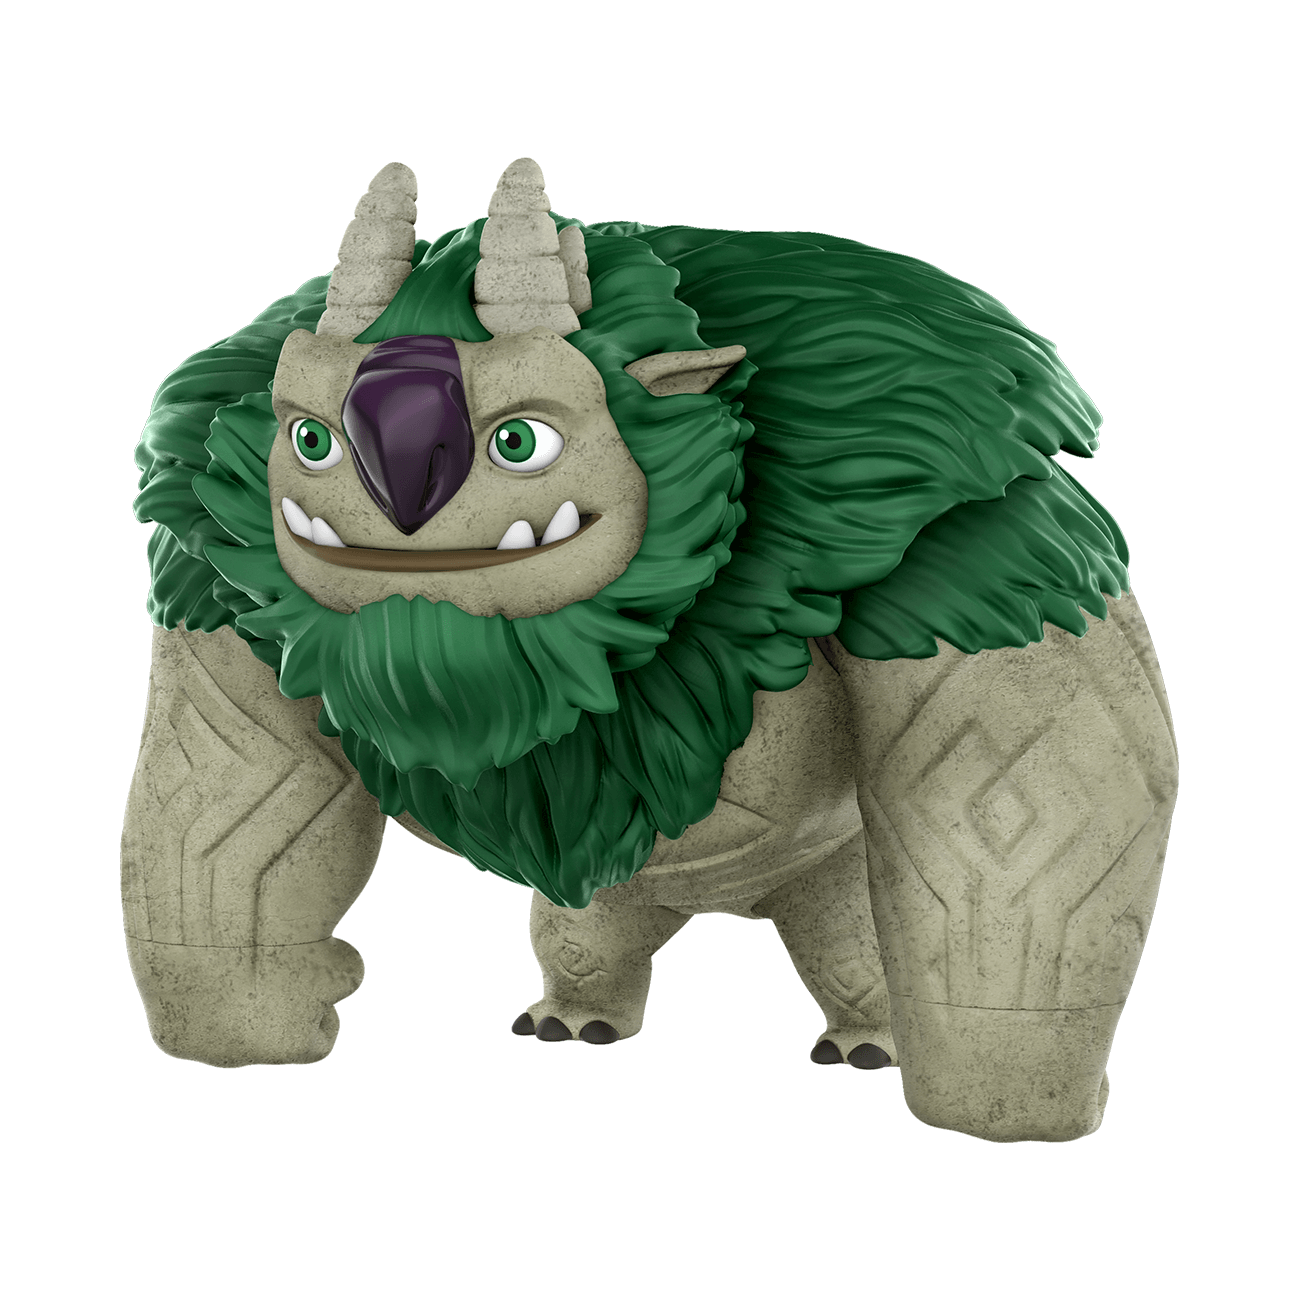 trollhunters argh action figure. more about jim henson's tale of sand ...